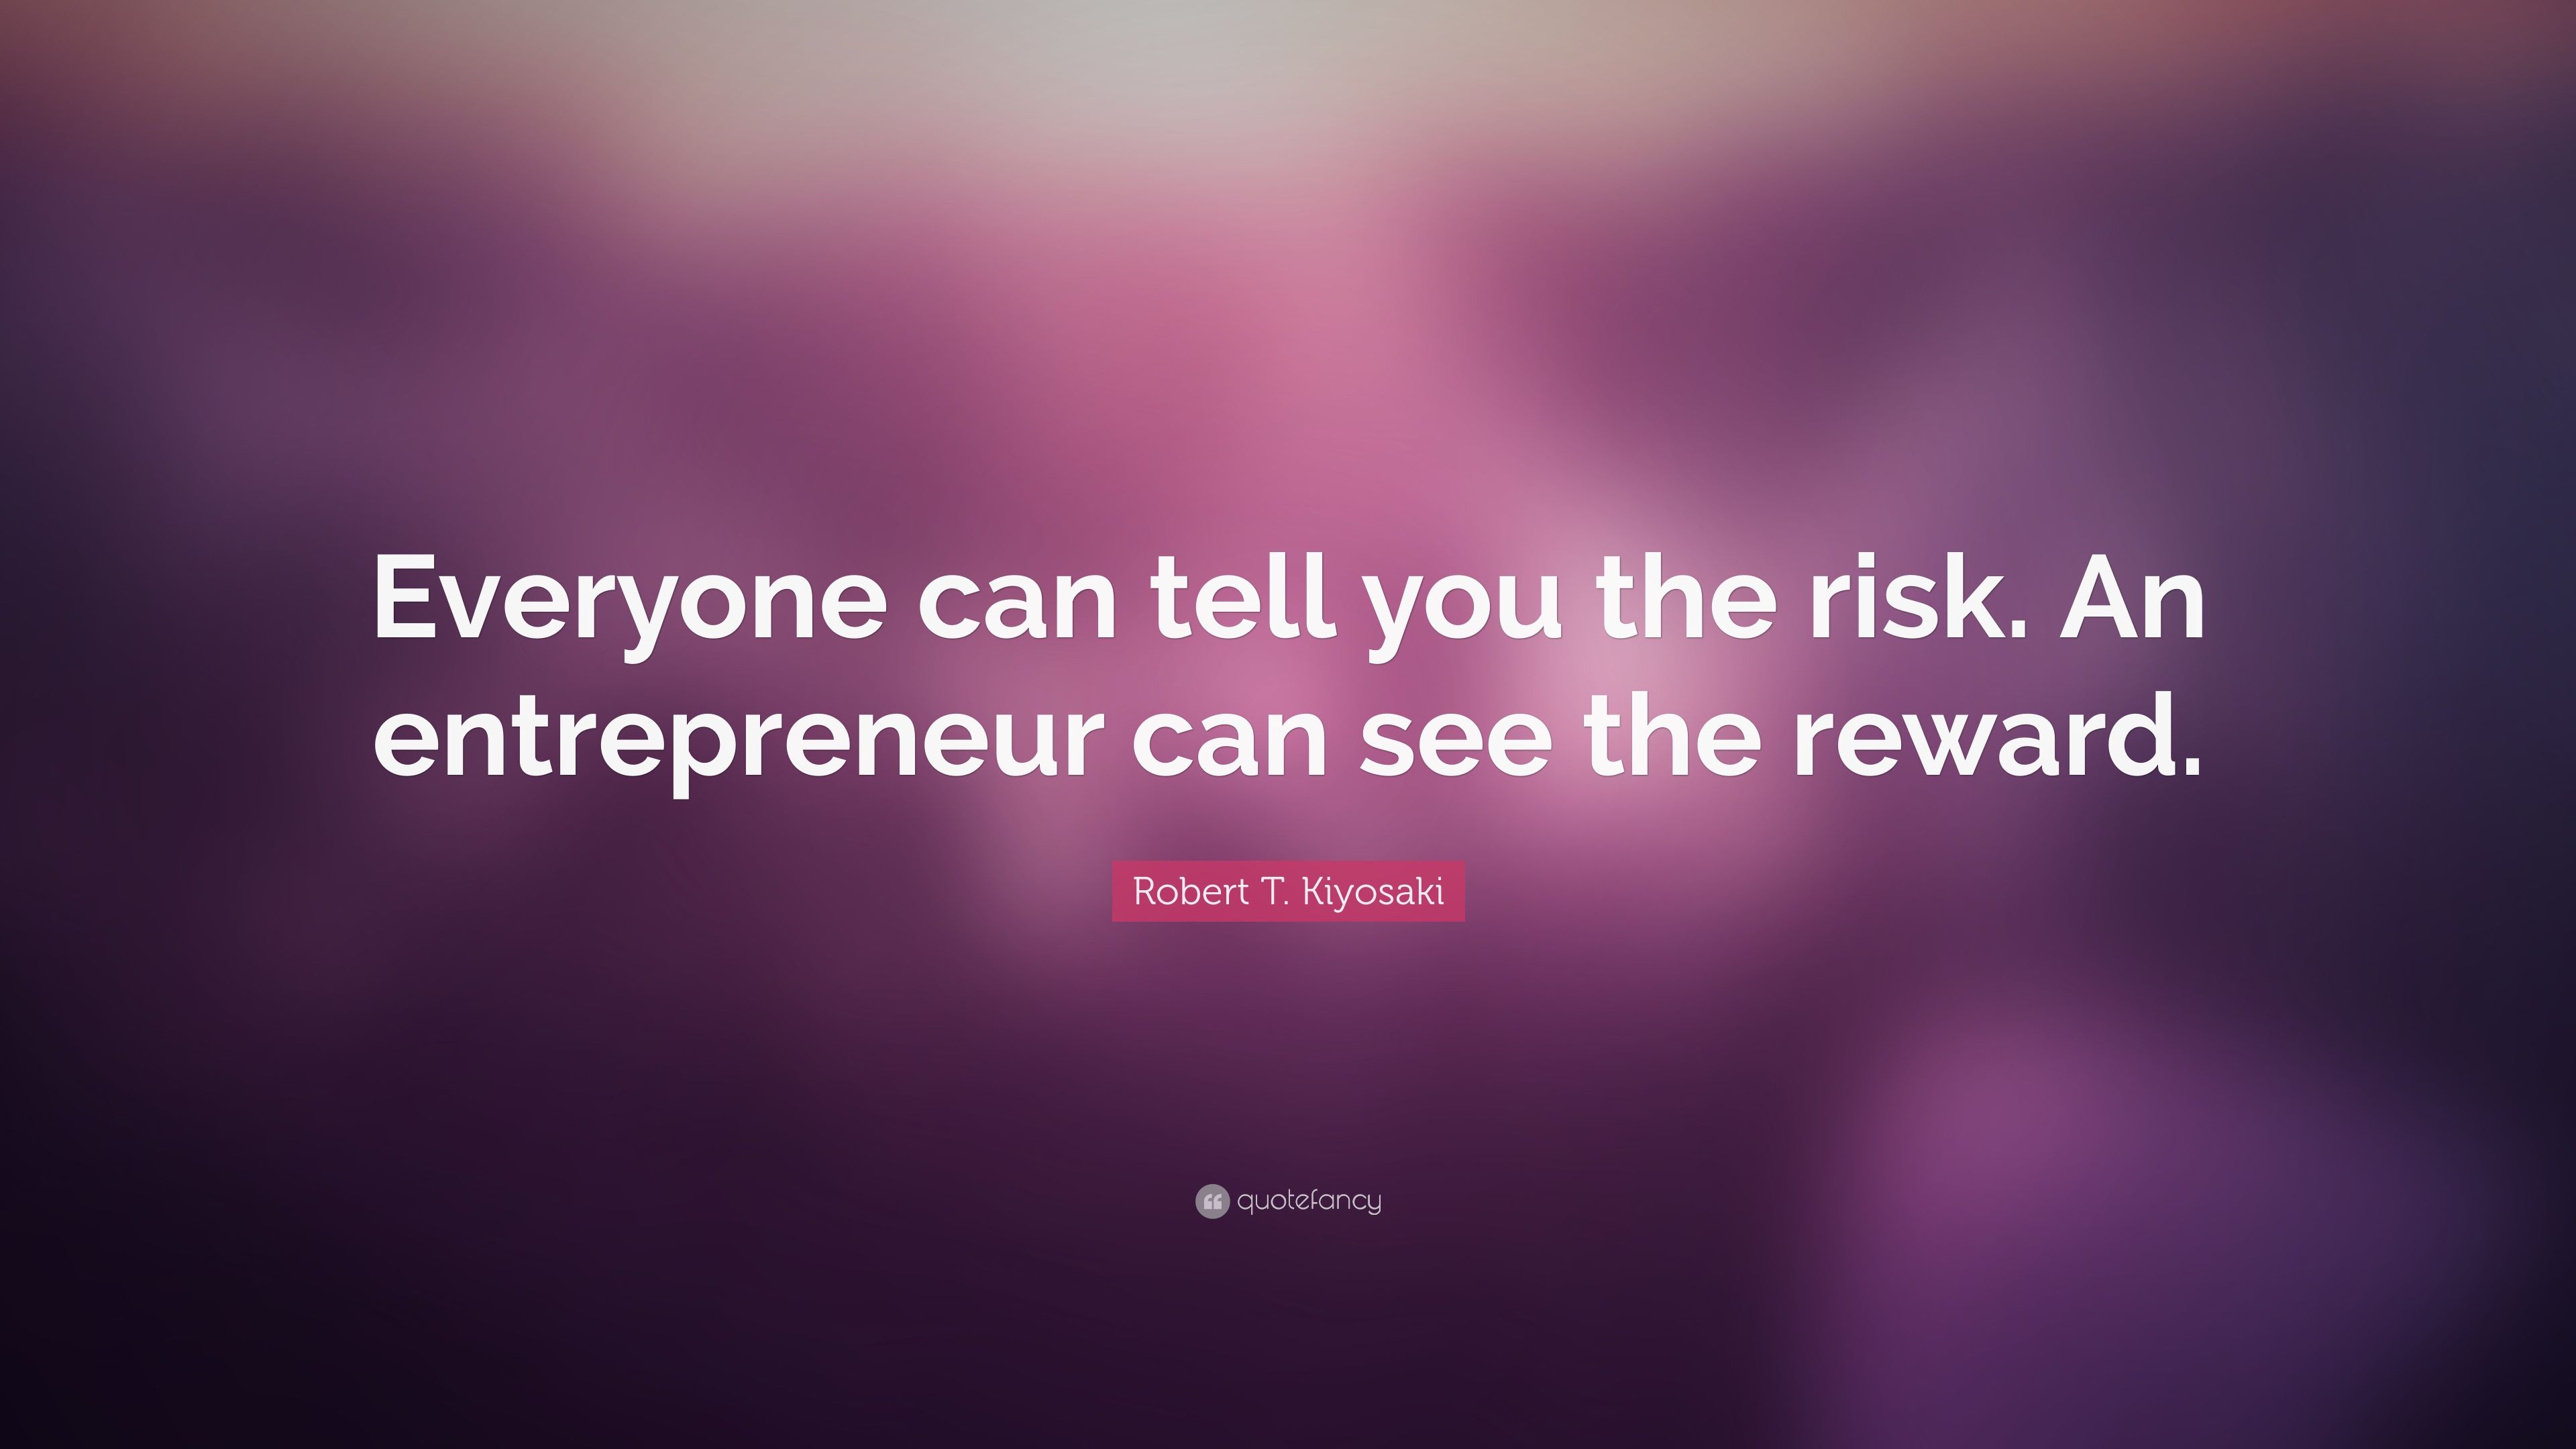 Robert T. Kiyosaki Quote: “Everyone can tell you the risk. An entrepreneur can see the reward.” (23 wallpaper)